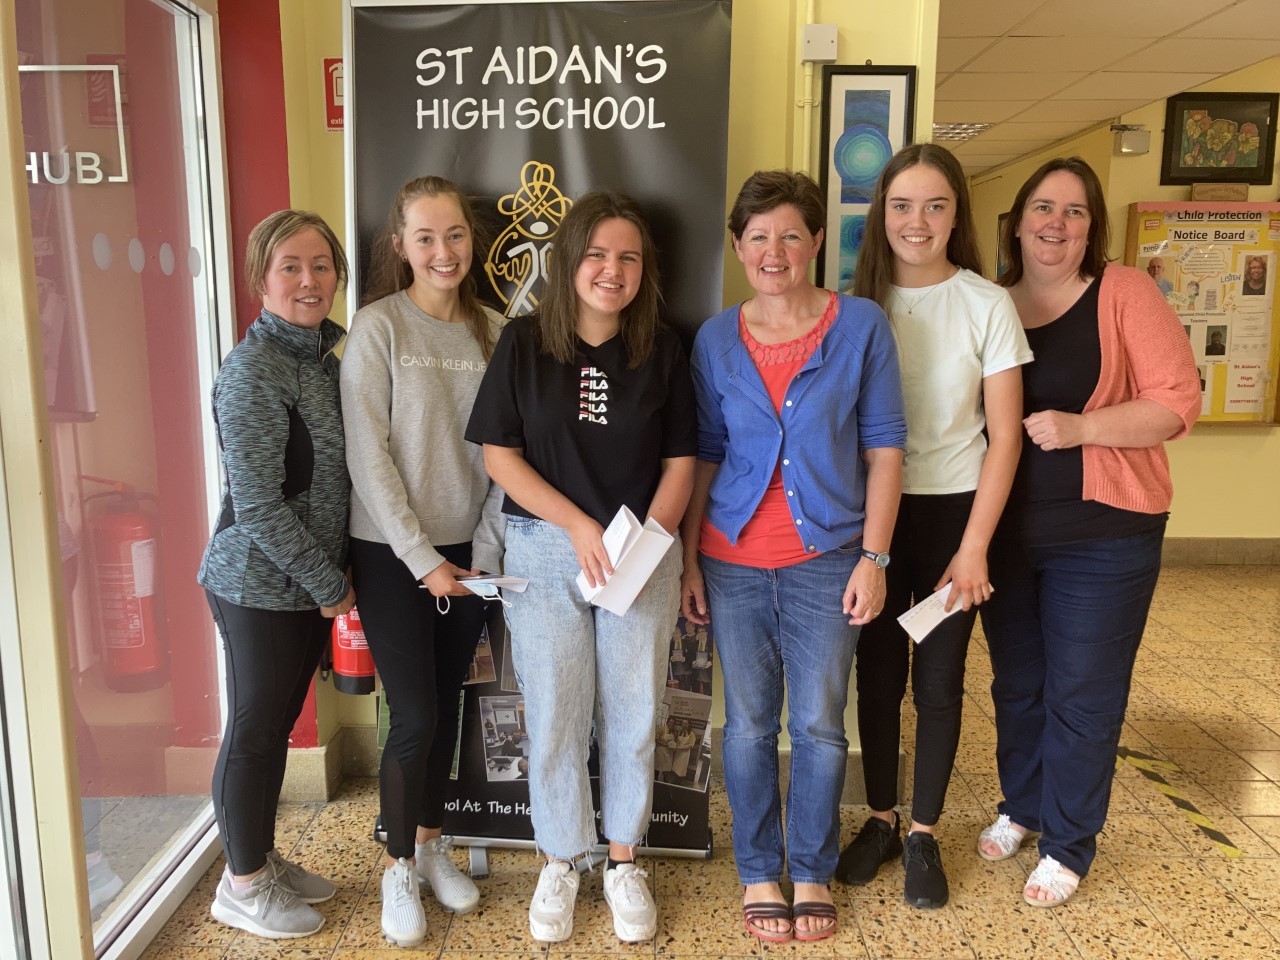 Schools salute students for superb GCSE results